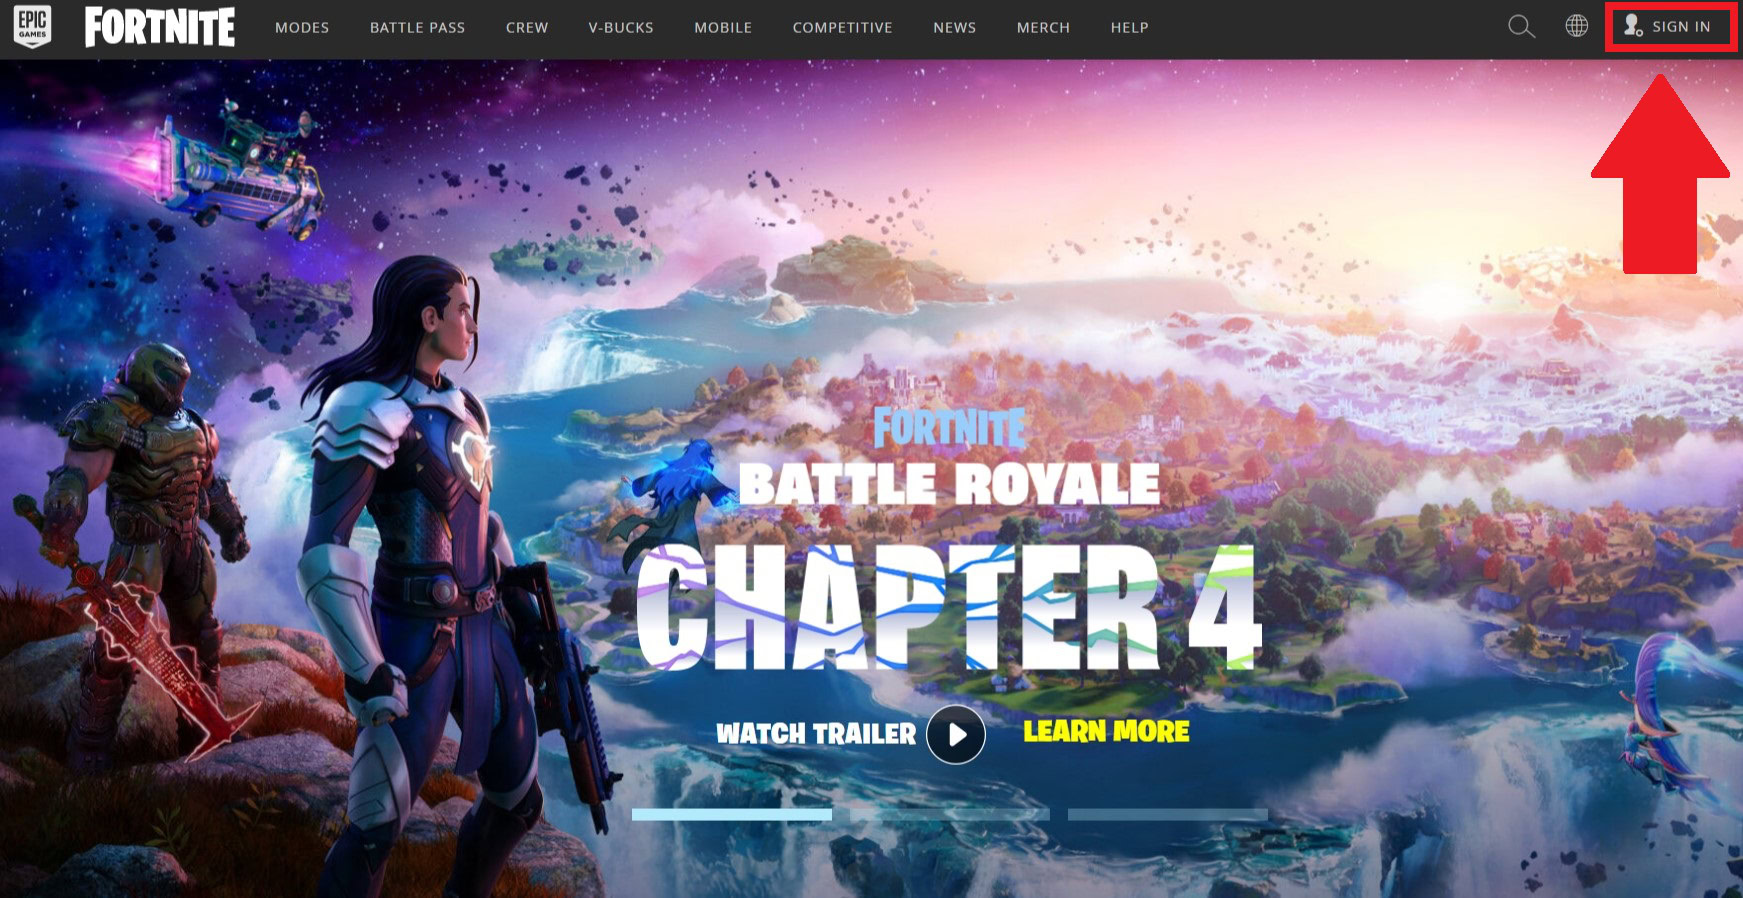 Fortnite/Epic Games - Authy